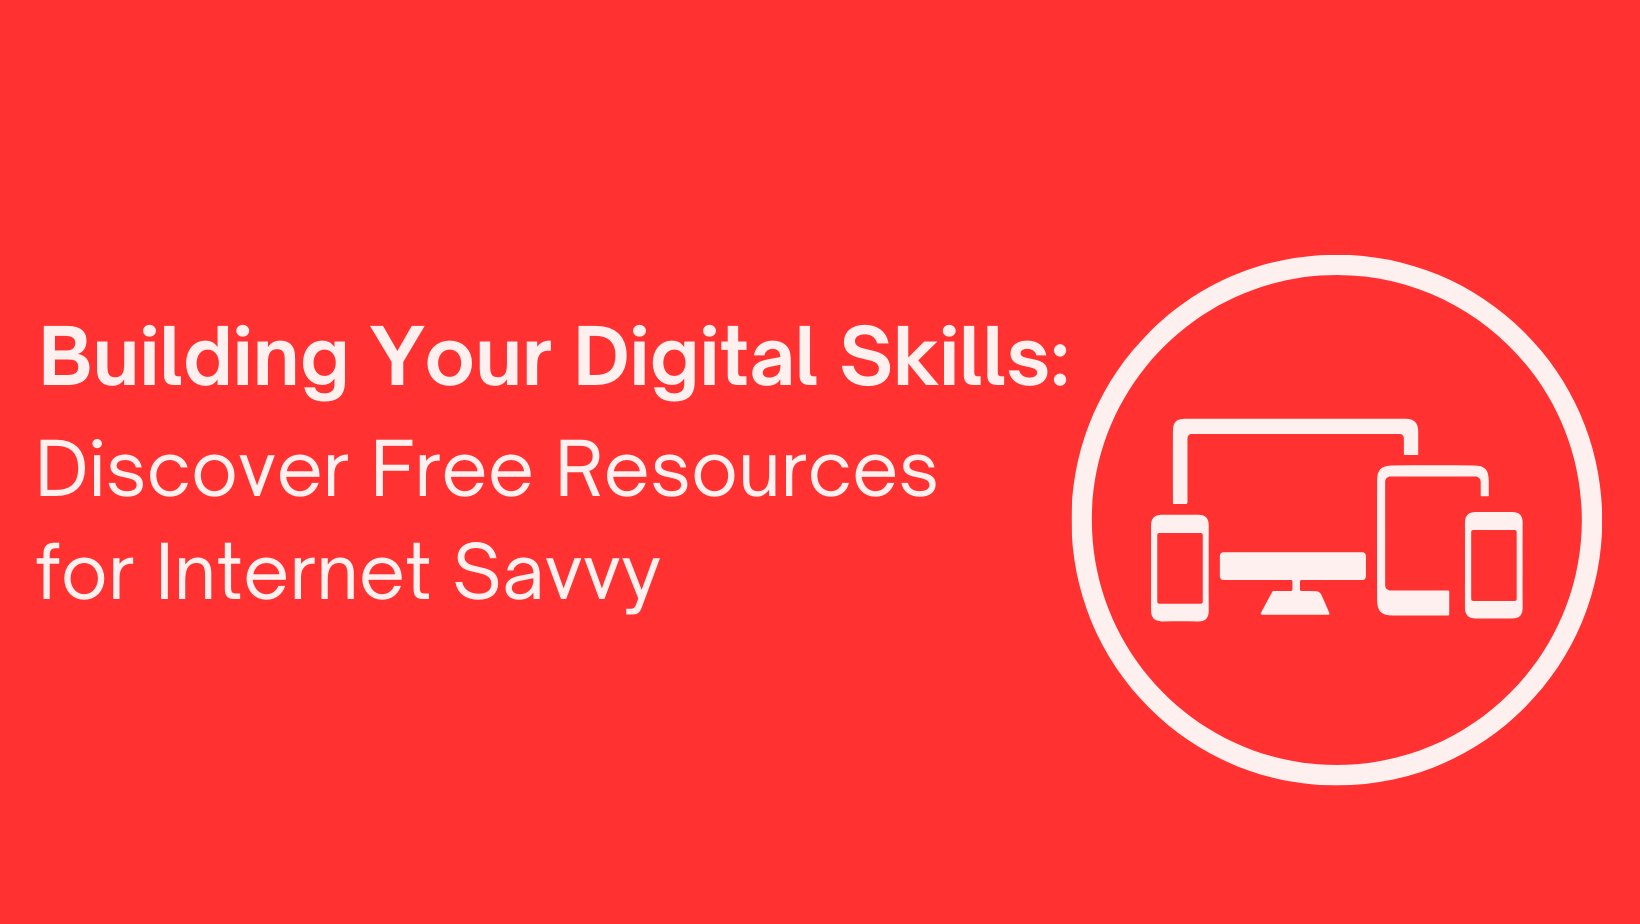 Join us for an empowering event Building Your Digital Skills Discover Free Resources for Internet Savvy. 